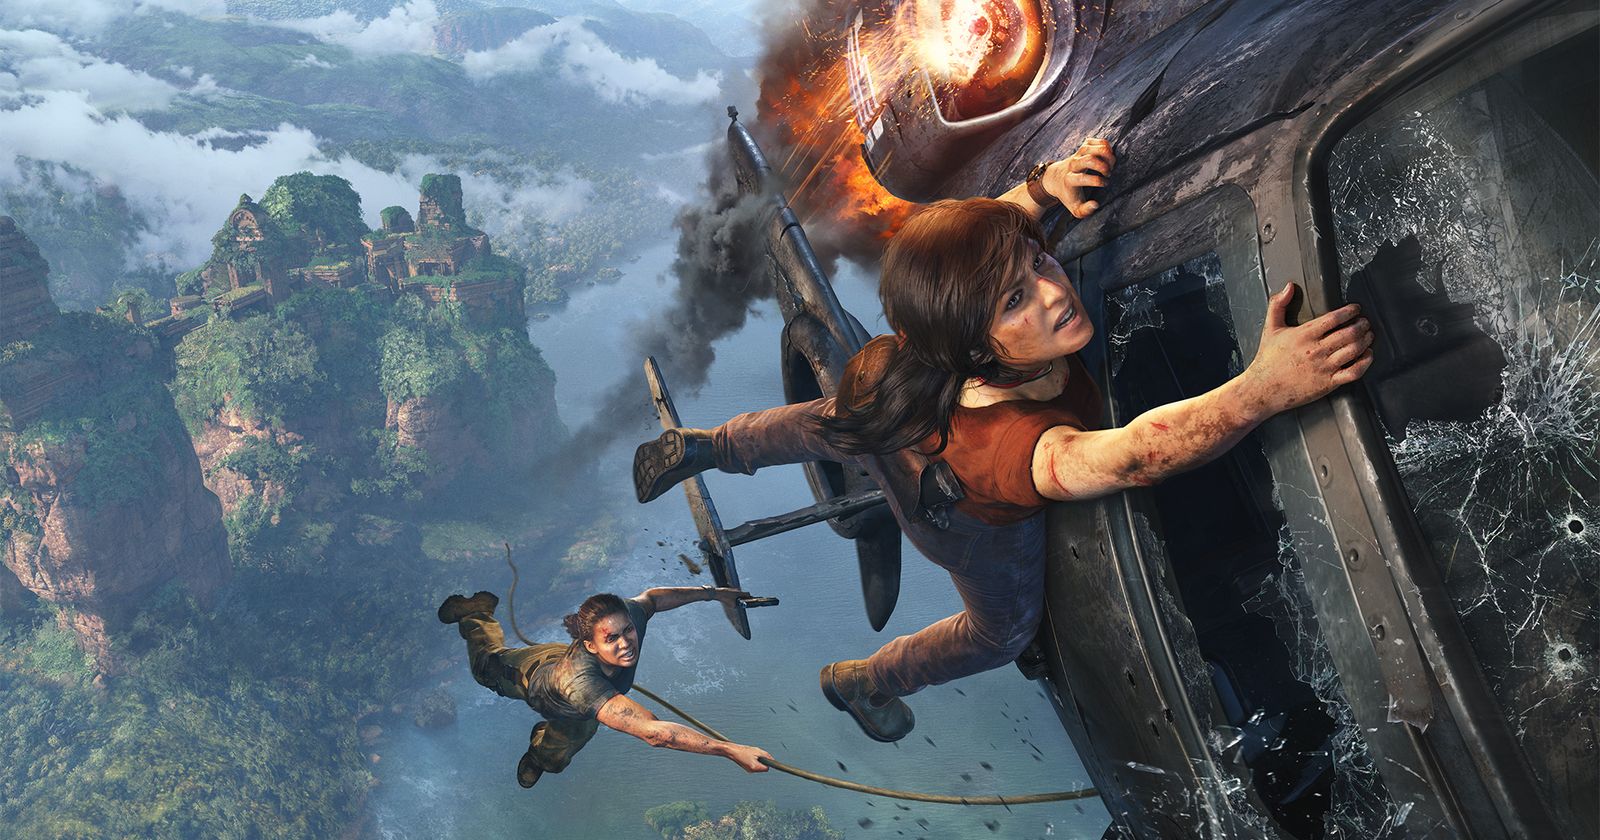 Want to play Uncharted: Legacy of Thieves Collection on PC? Release date  confirms you won't have to wait long - Dot Esports